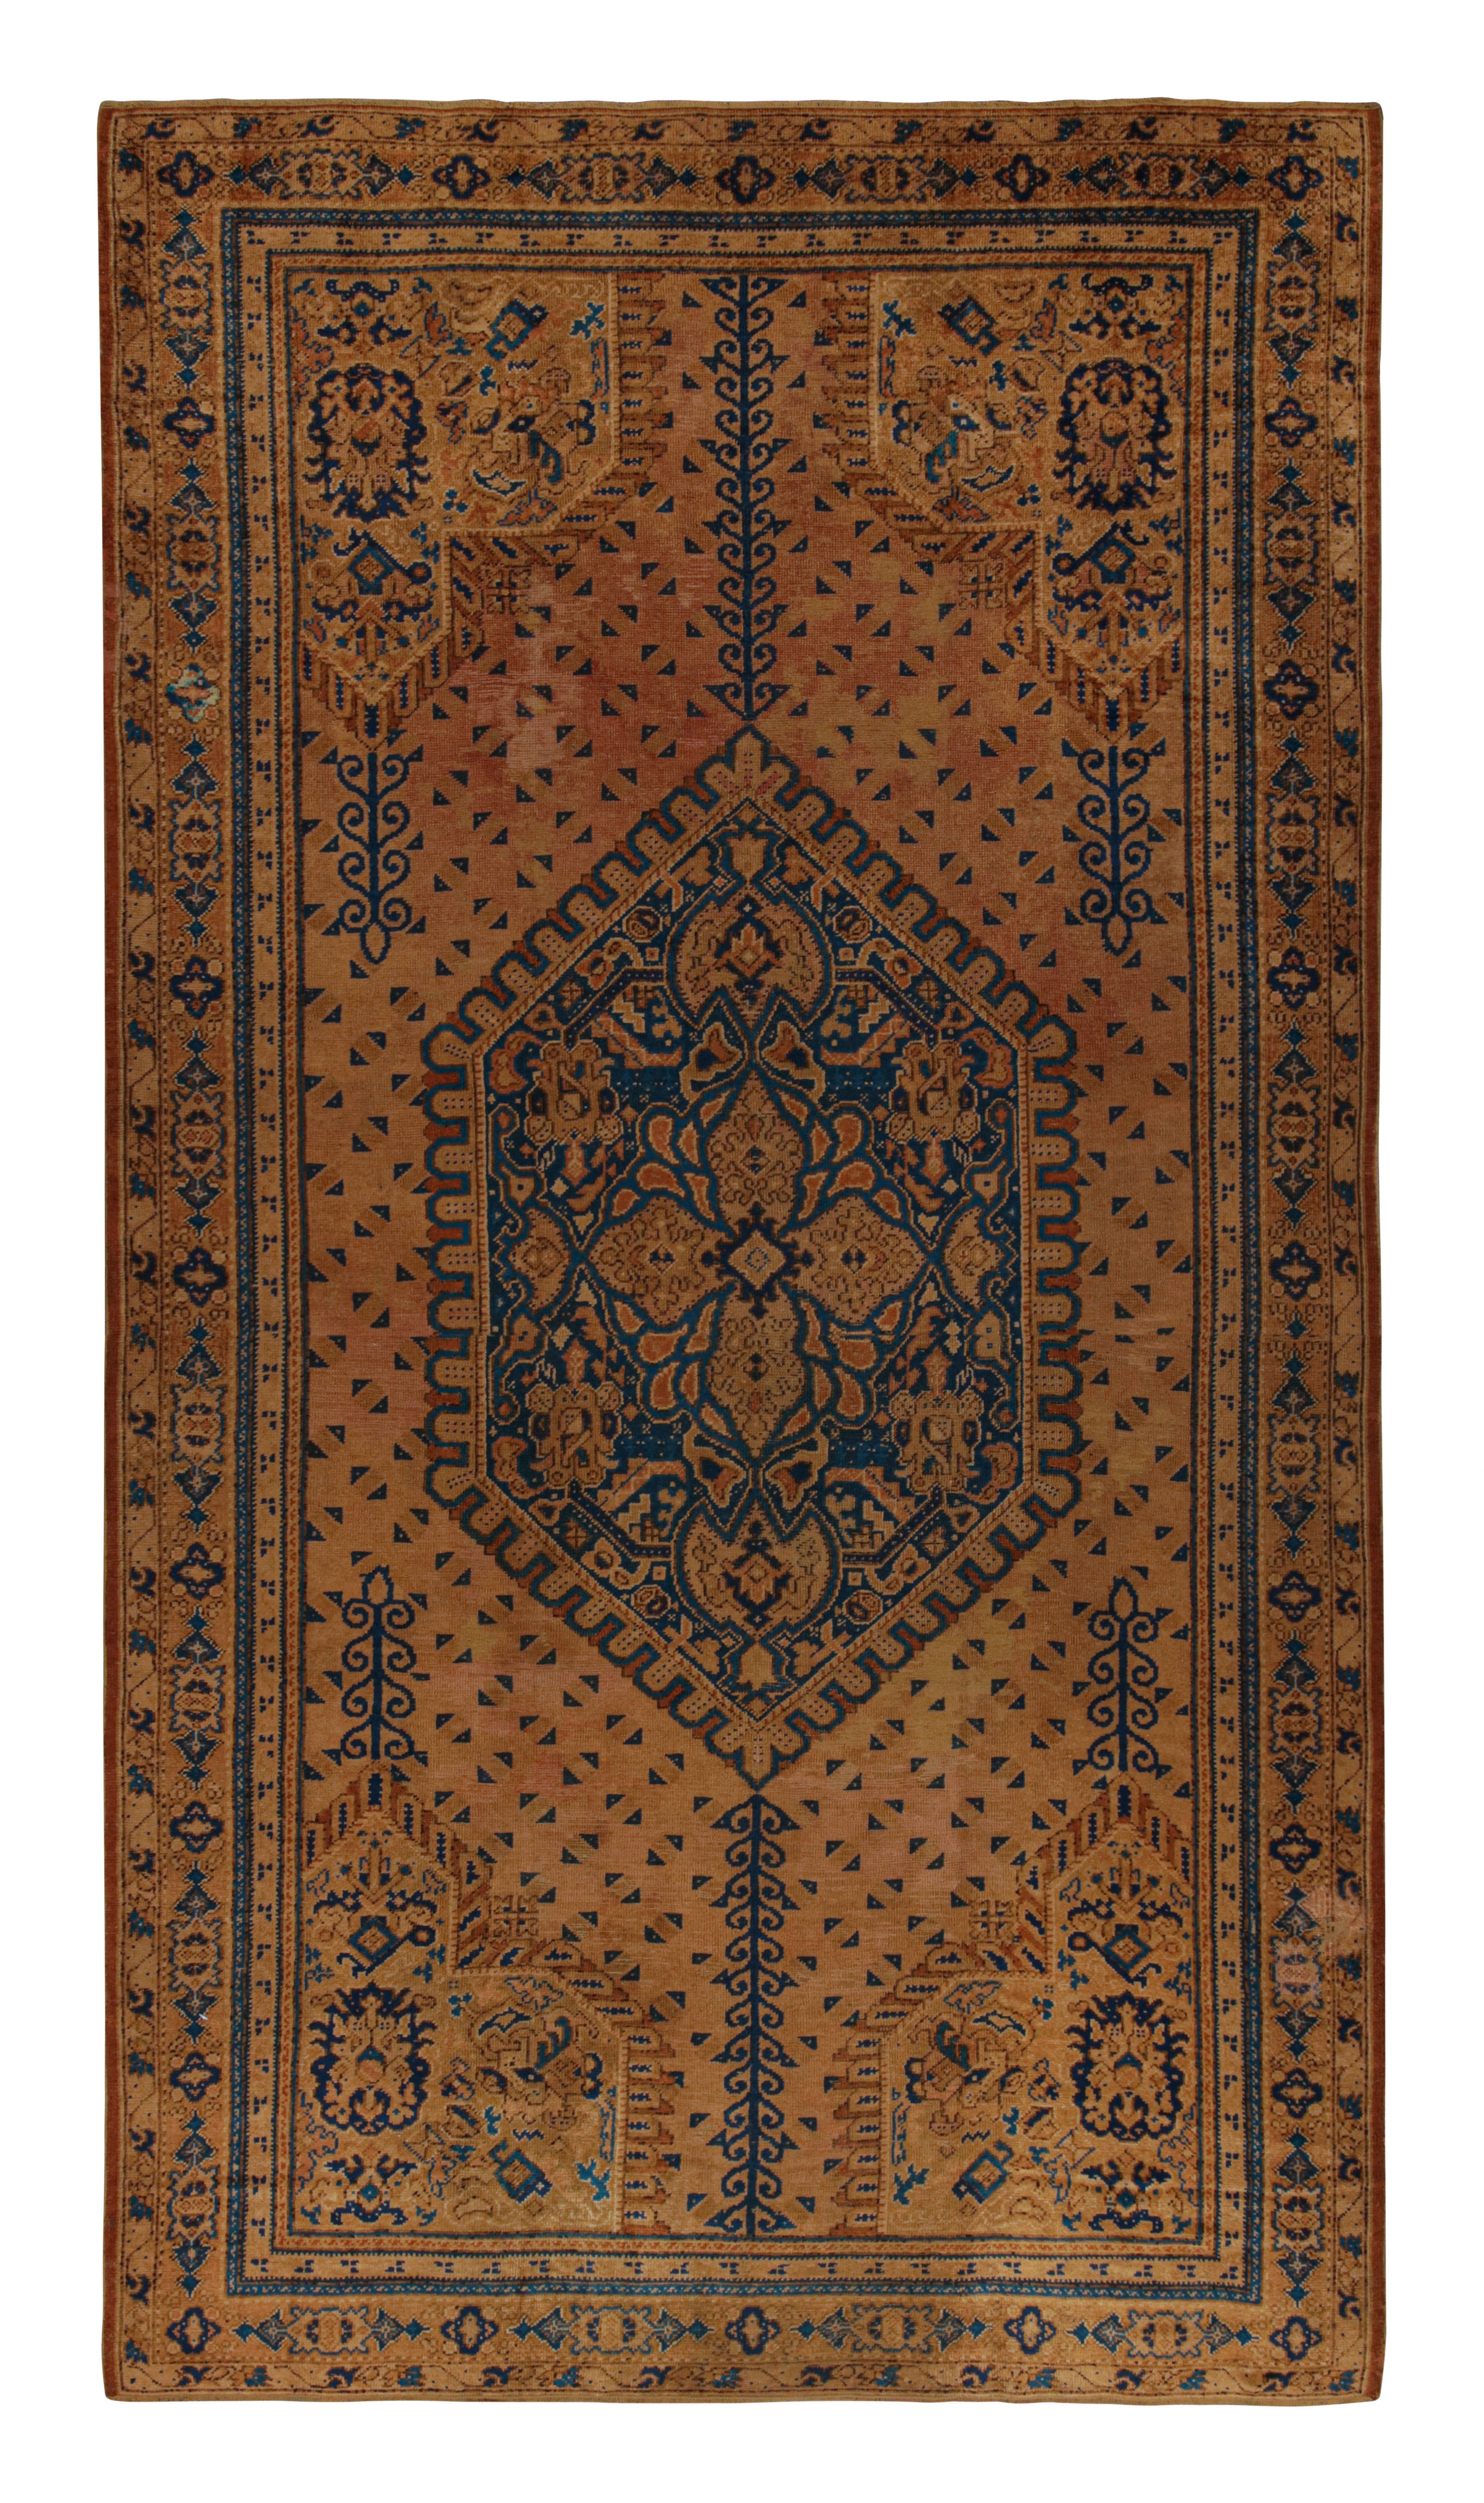 Oversized Antique European Rug in Brown with Blue Medallion, from Rug & Kilim For Sale